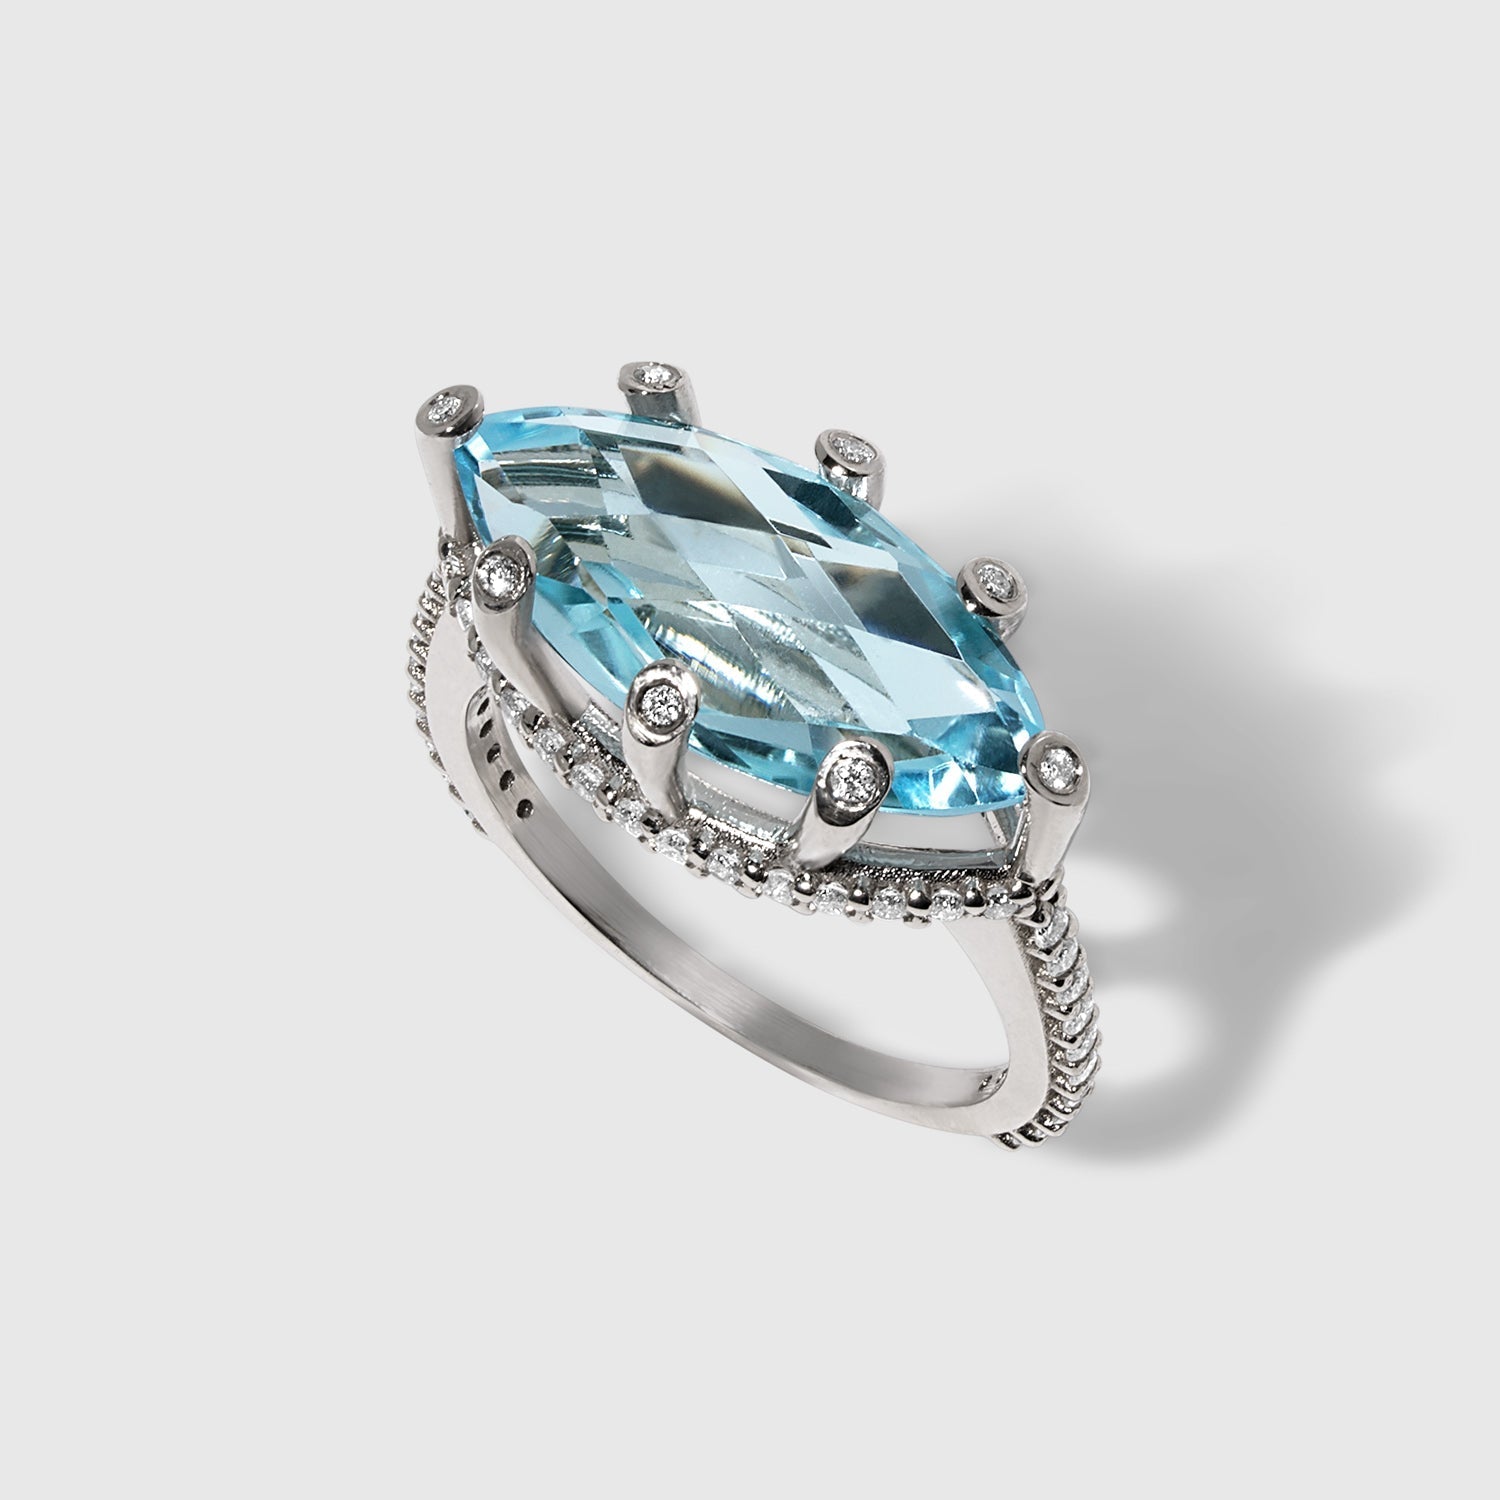 Sky-Blue Topaz & White Diamonds - Marquise Ring in Solid White Gold – SkyTower Set - Aurora Laffite Jewelry